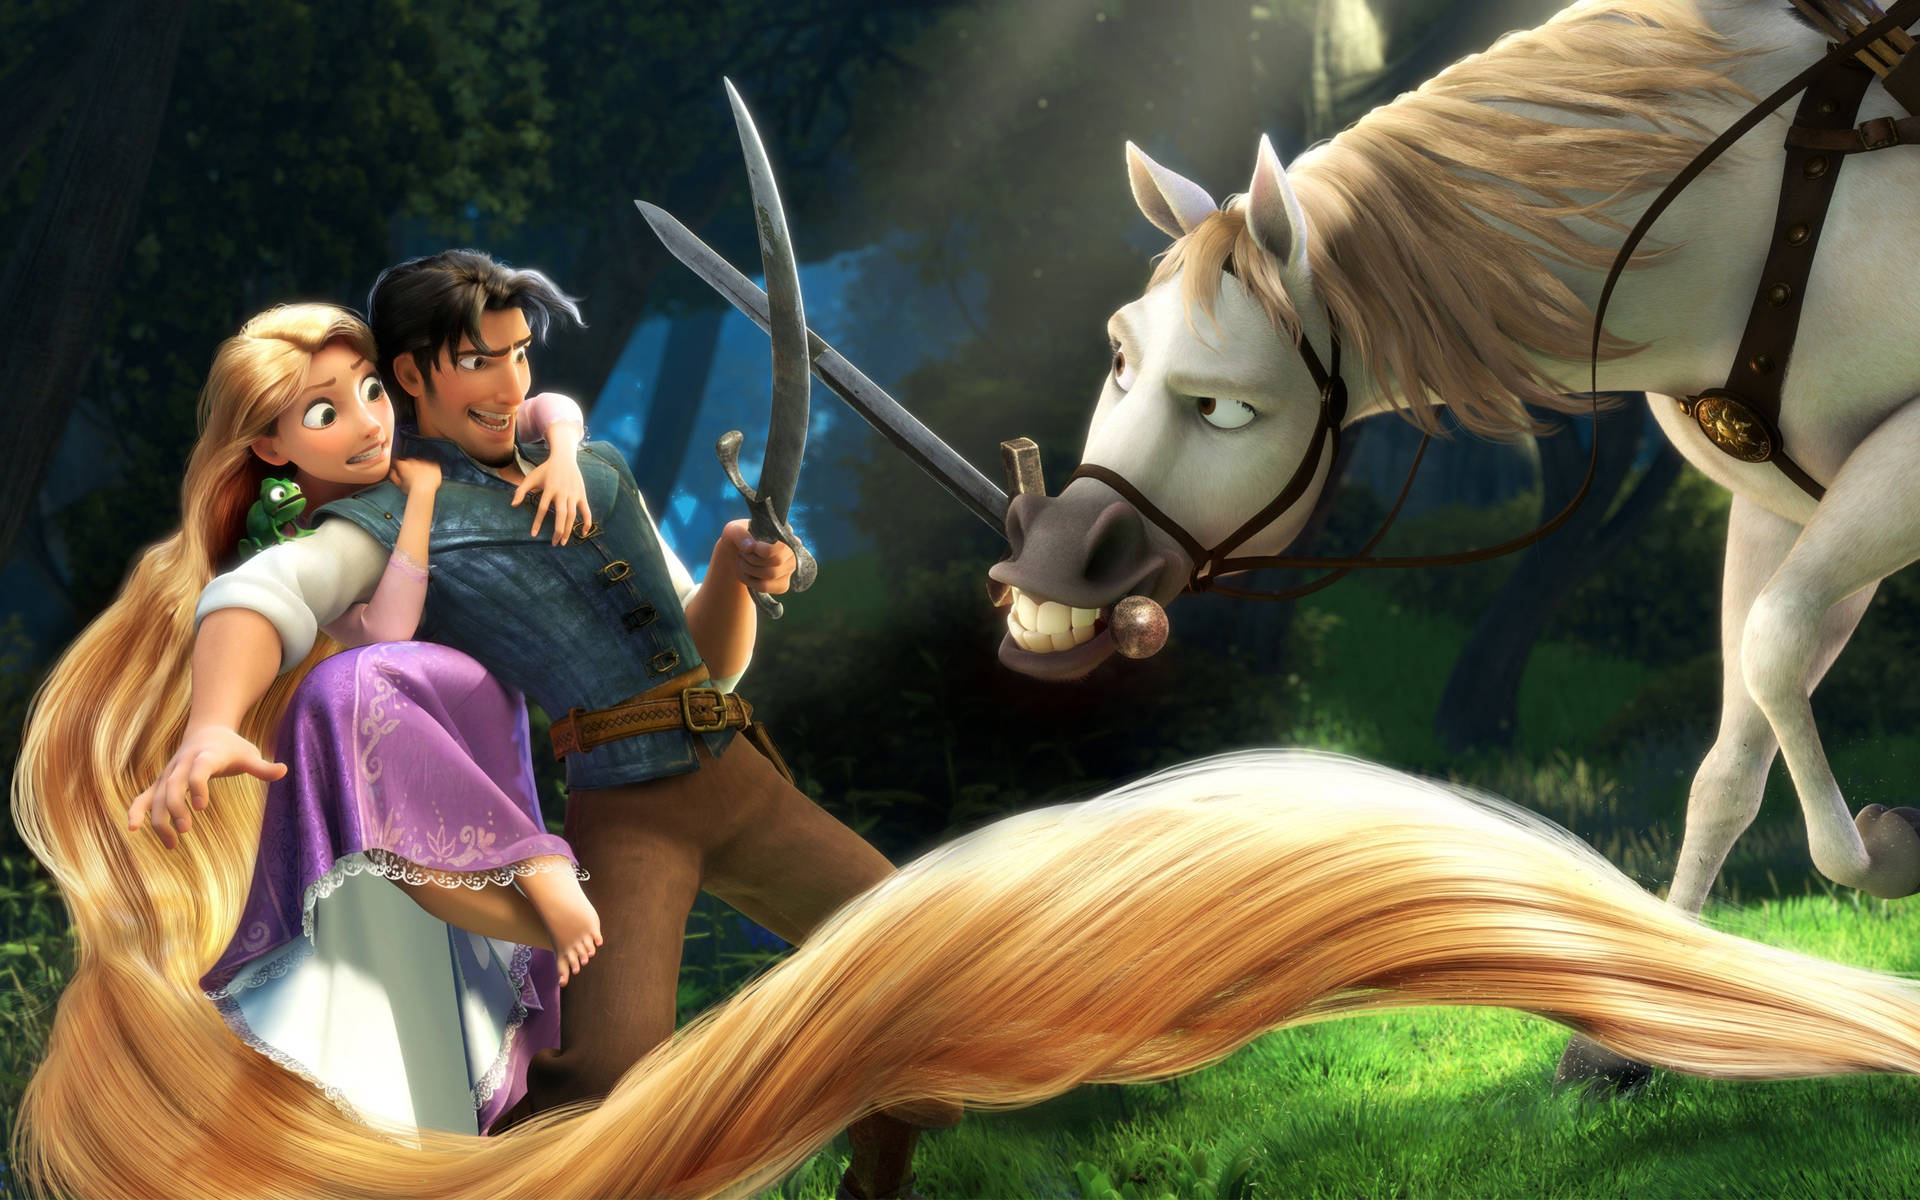 Rapunzel and Flynn engage in a daring sword fight Wallpaper